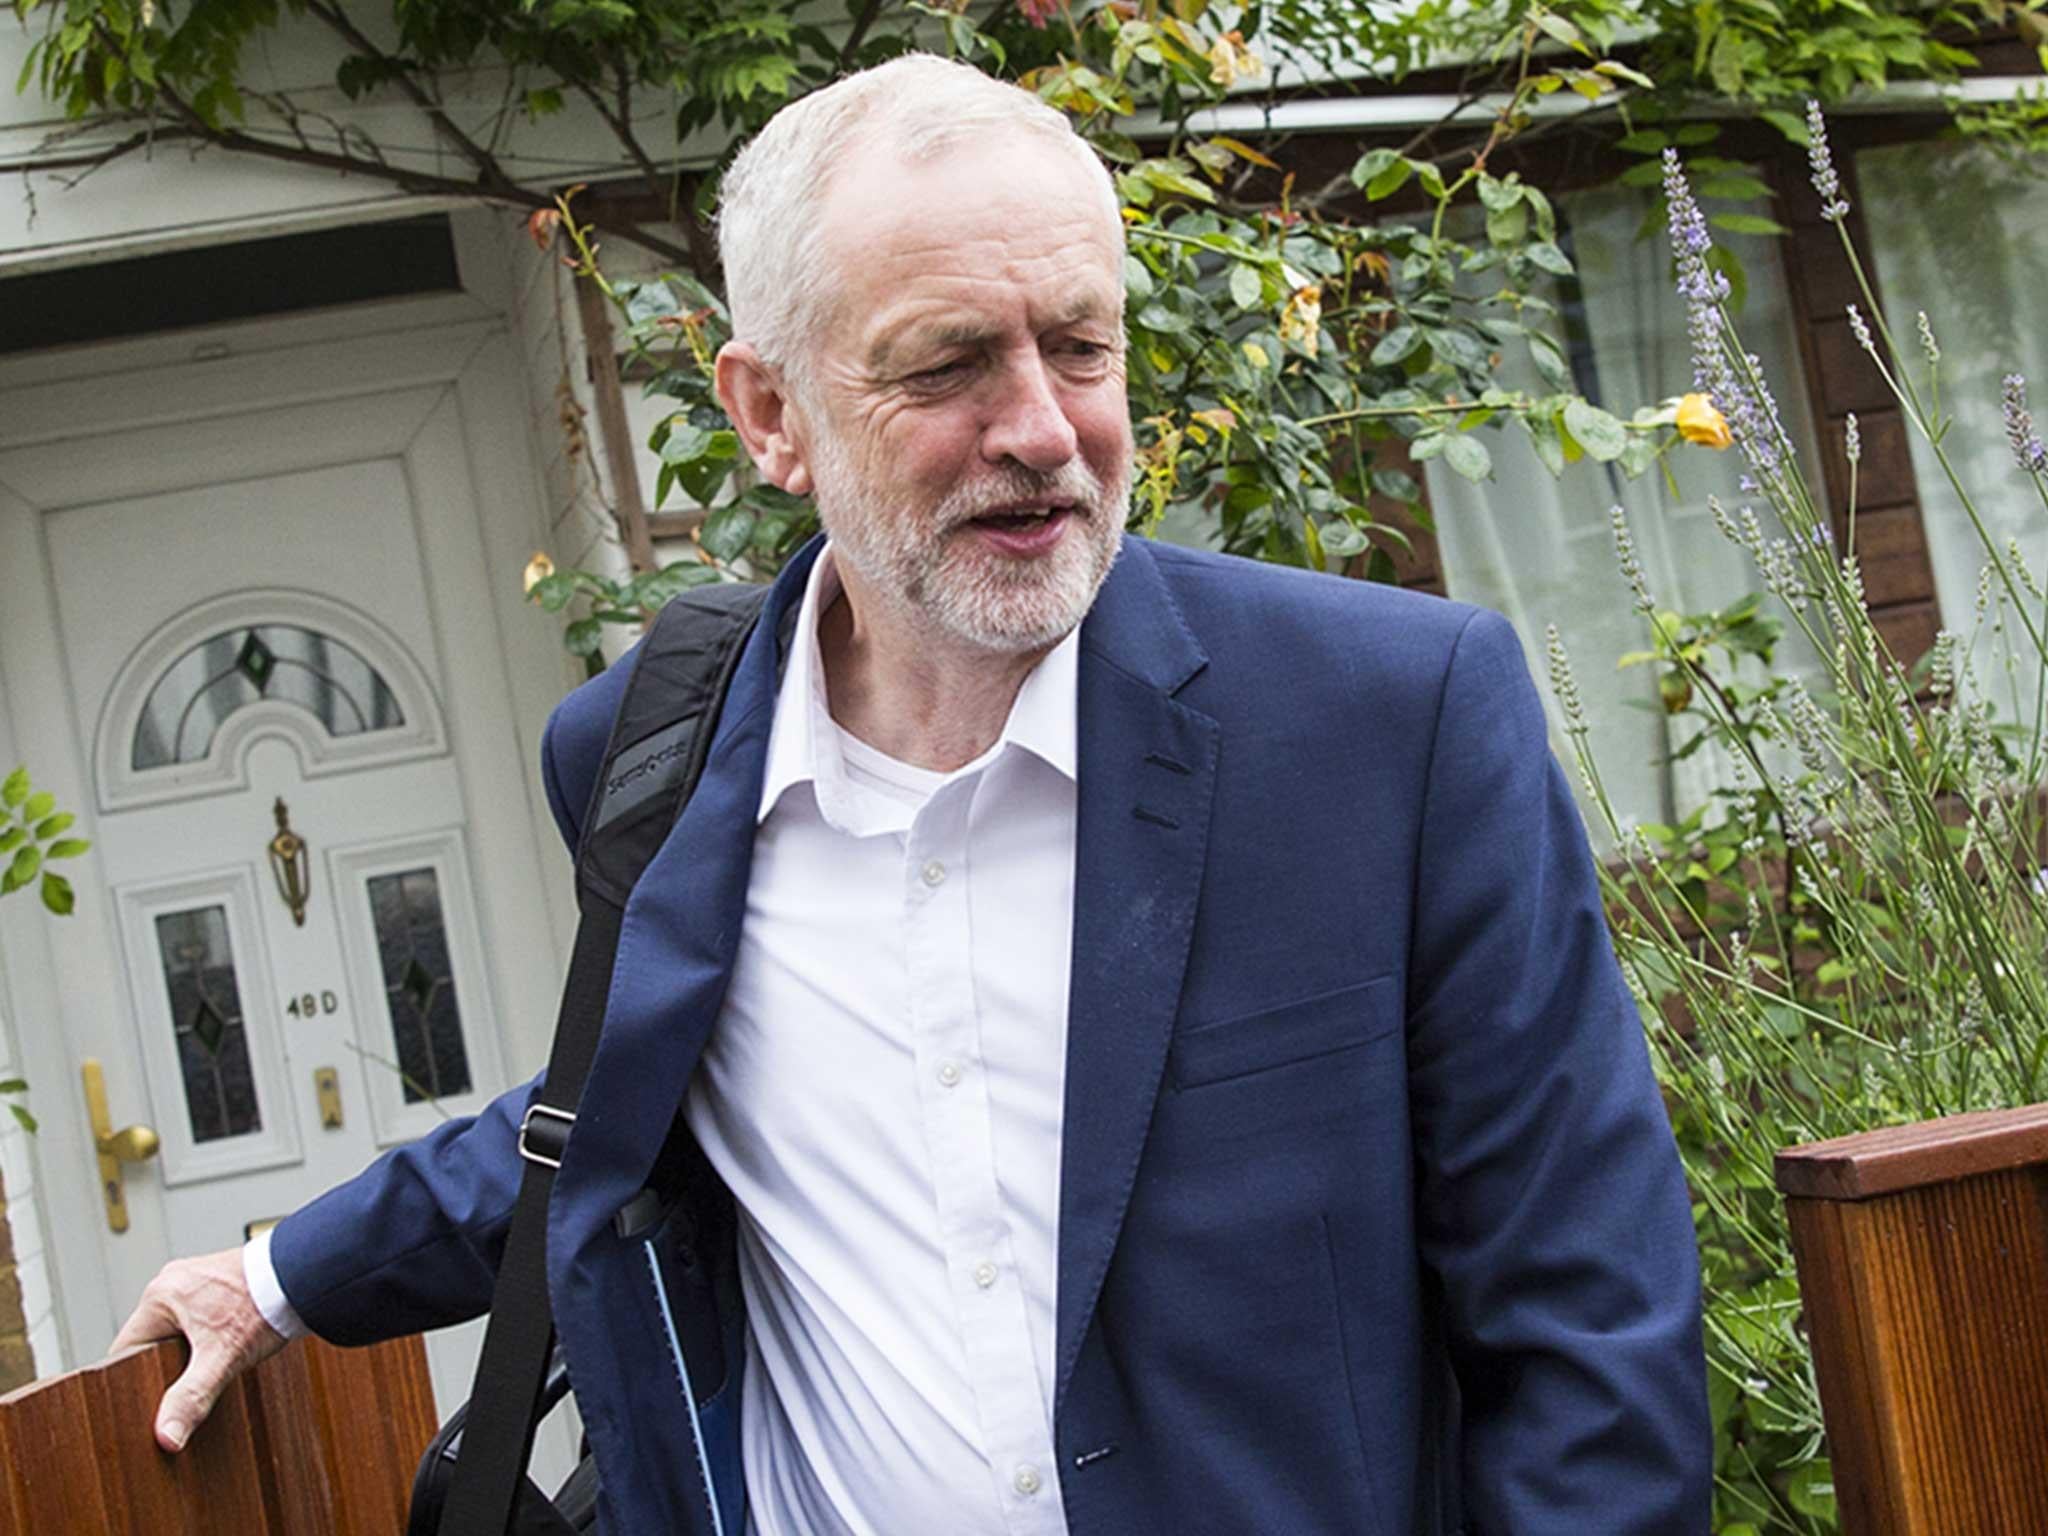 Labour leader Jeremy Corbyn leaves his home in Islington. The Labour Party can no longer win a general election if they go it alone